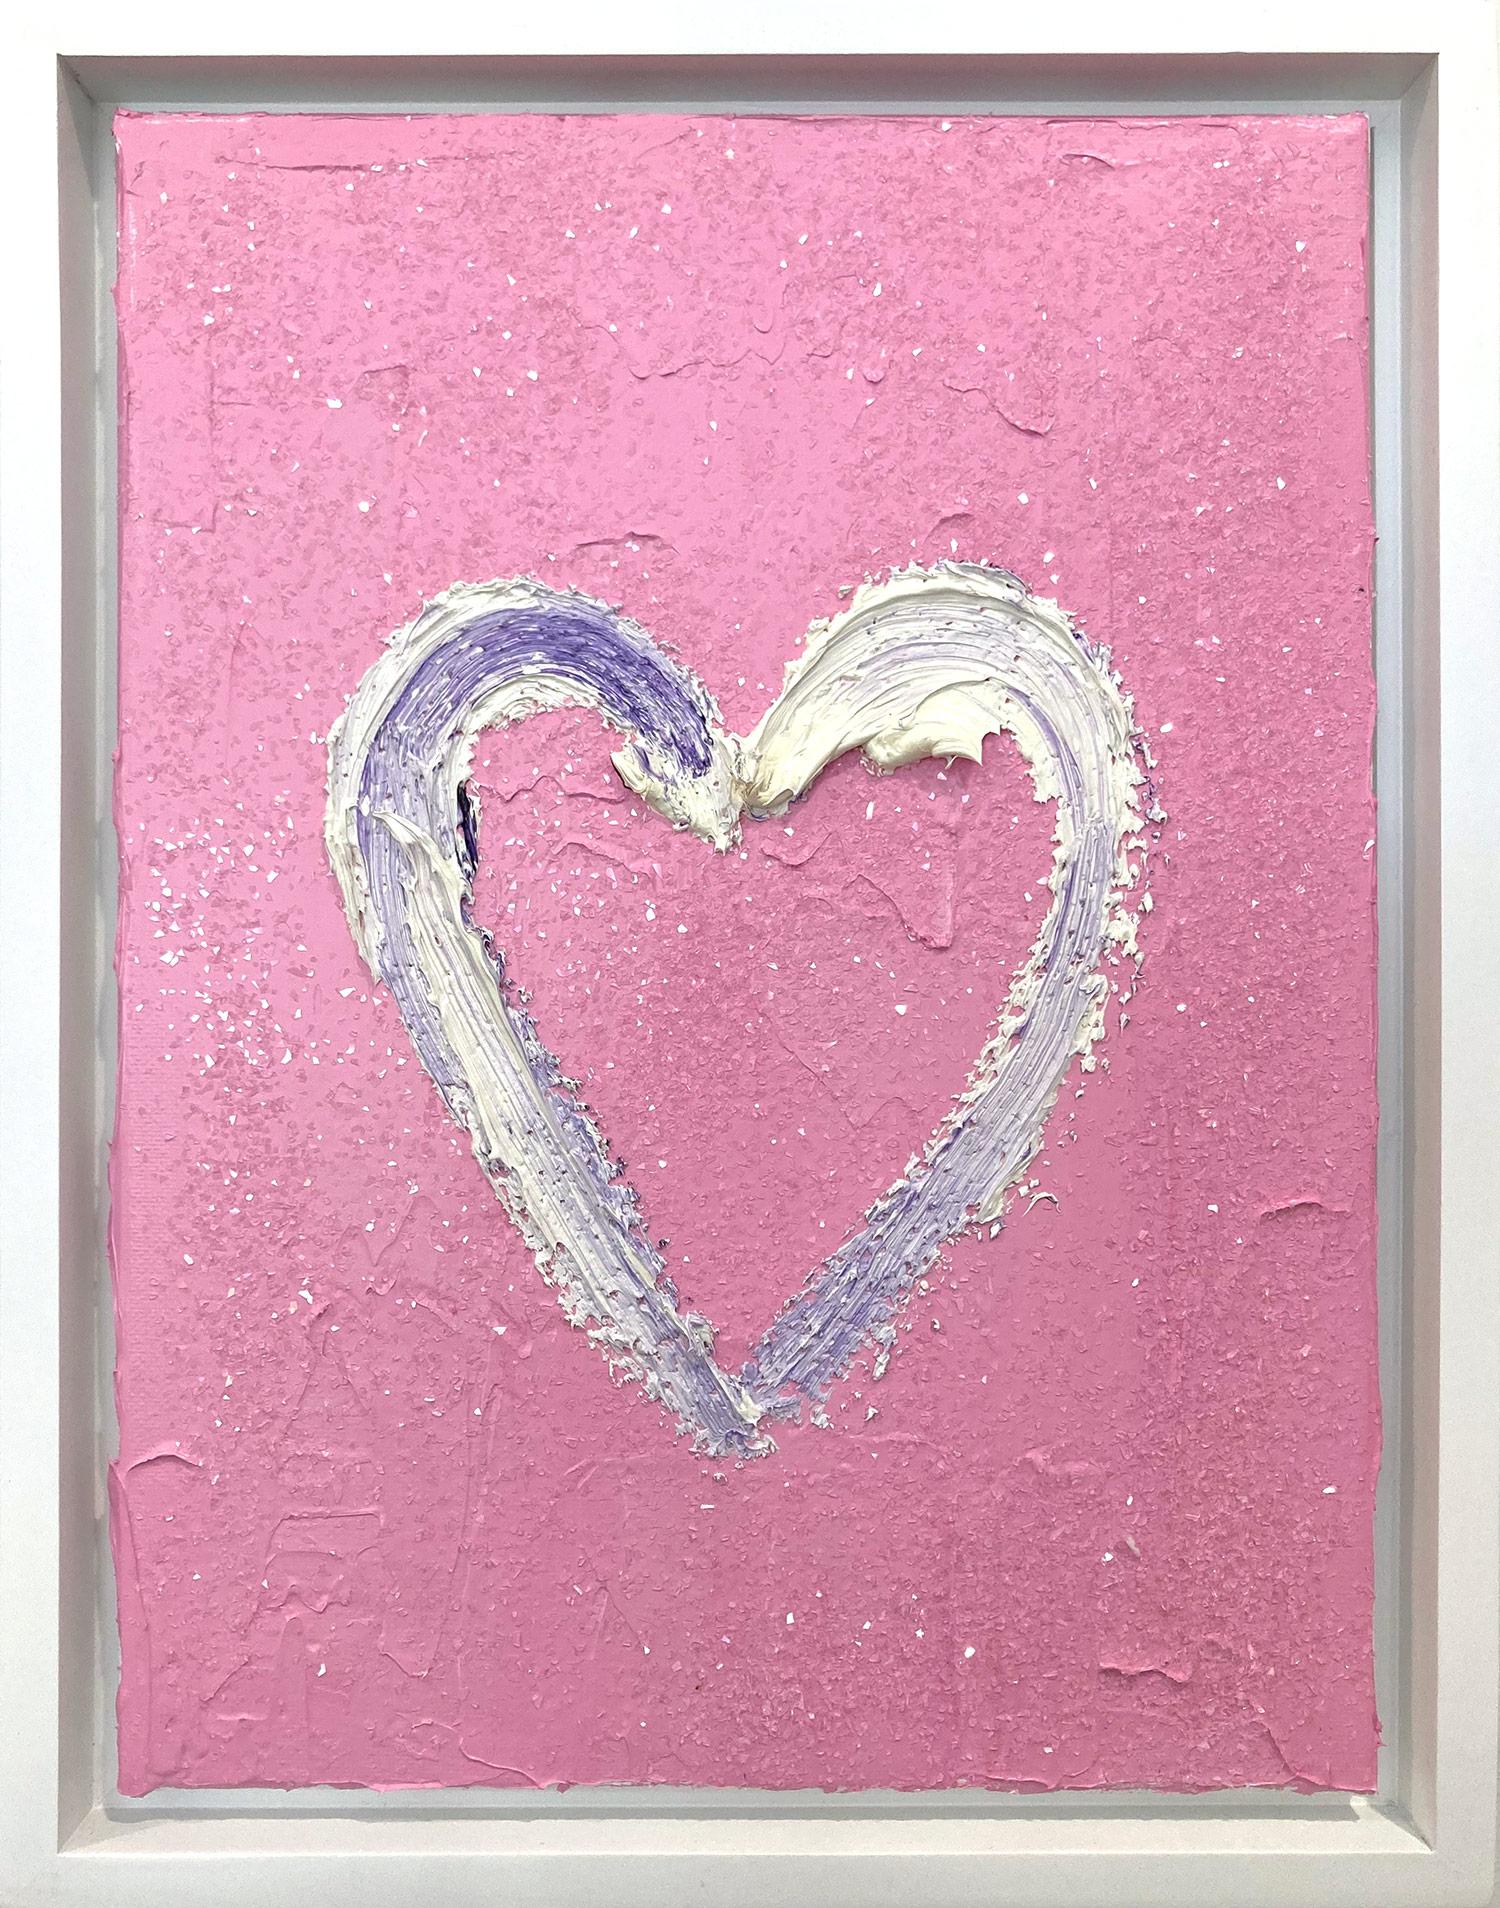 Cindy Shaoul Figurative Painting - "My Pink Diamond Heart" Pink and White Pop Art Oil Painting with Floater Frame